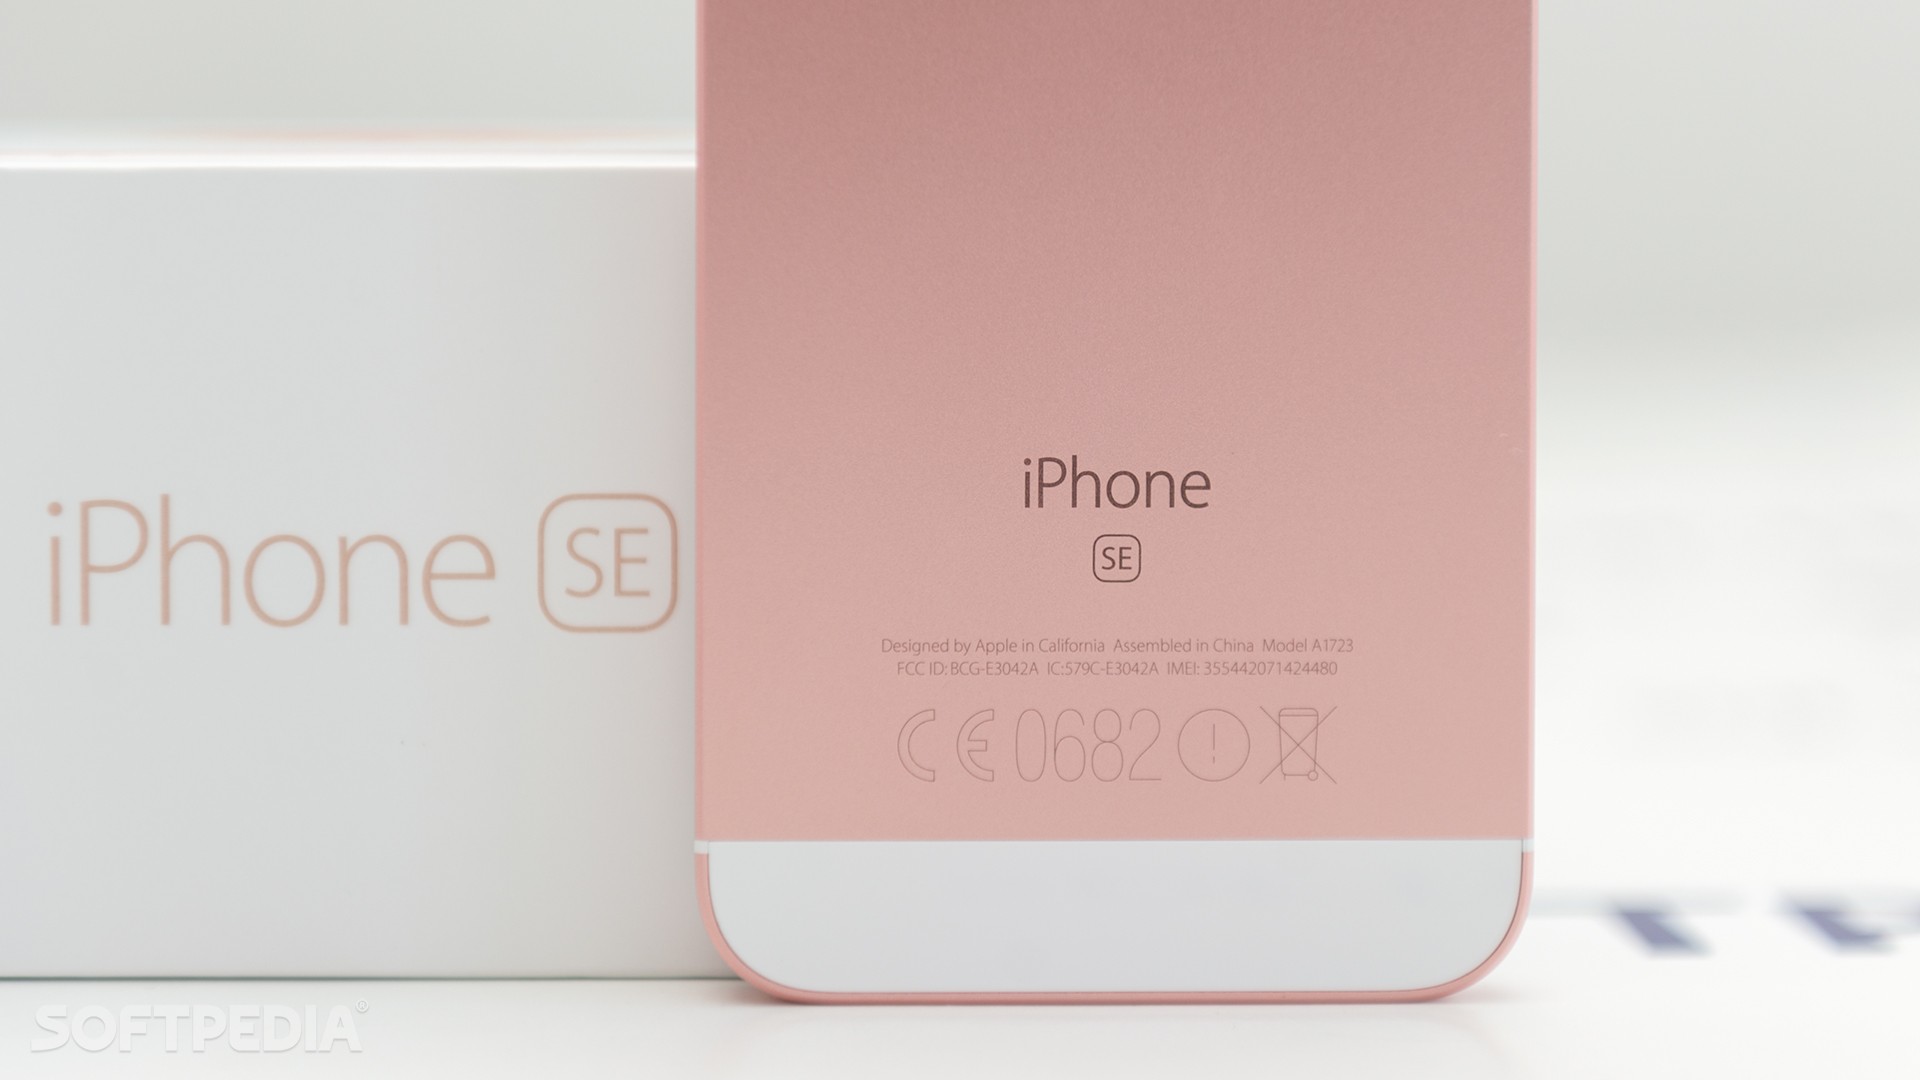 Second Generation Iphone Se Could Launch This Year As Iphone Xe